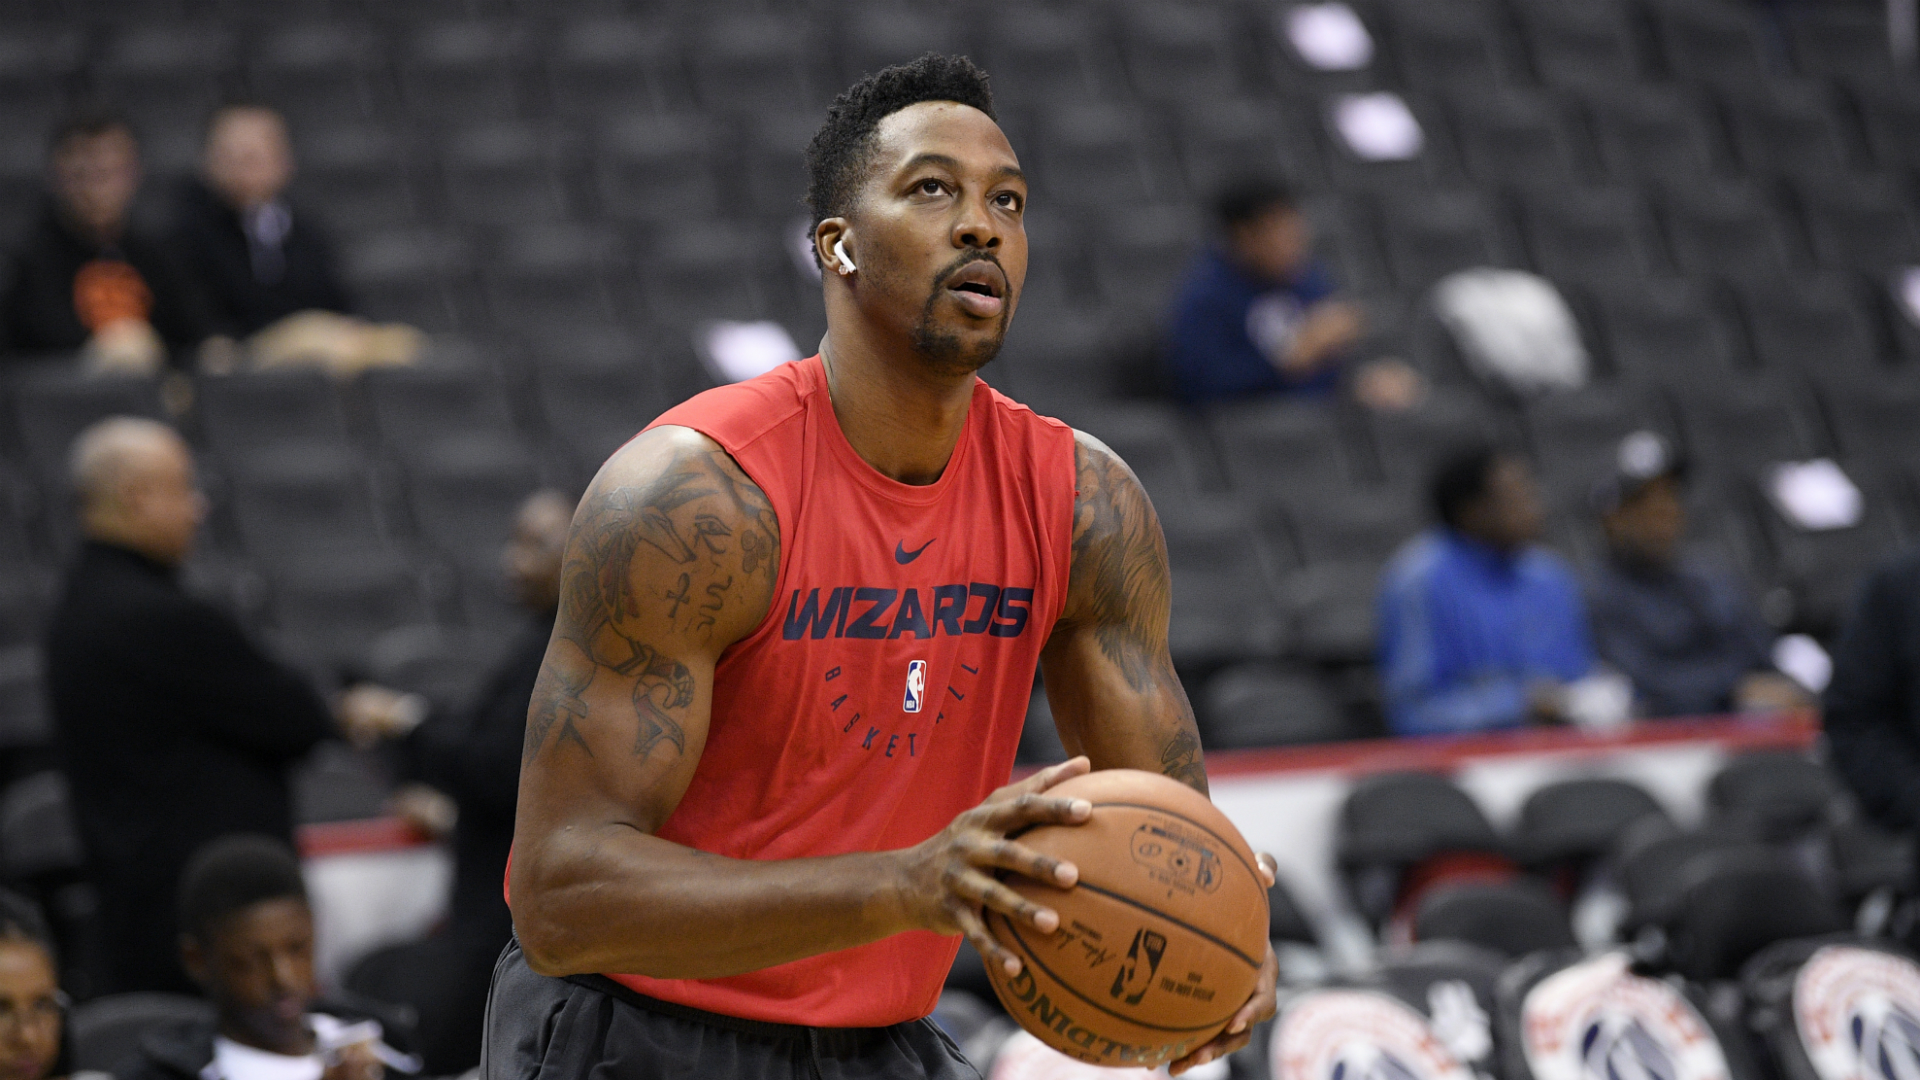 Still missing Dwight Howard, Wizards continue to be among NBA's